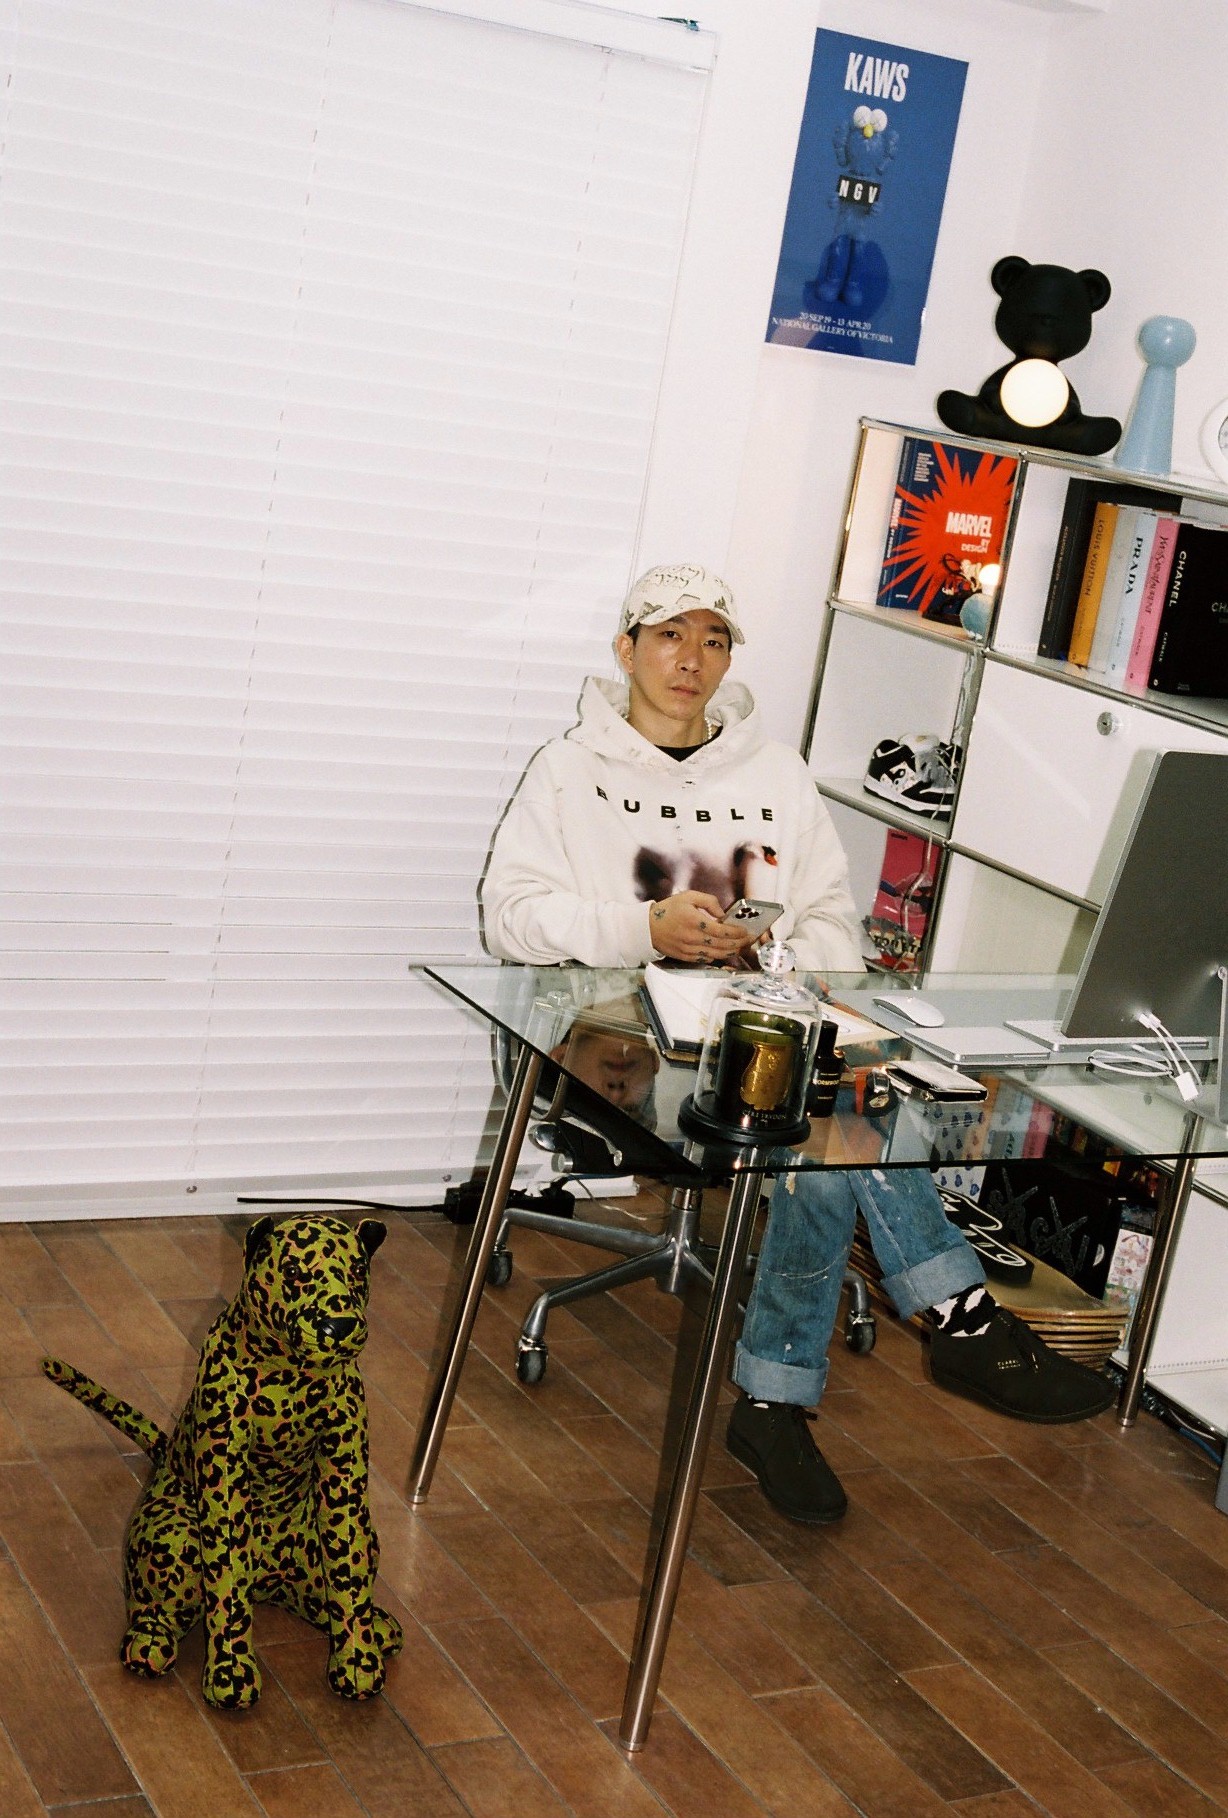 stylist wook kim sits behind a glass desk with a leopard statue by his side